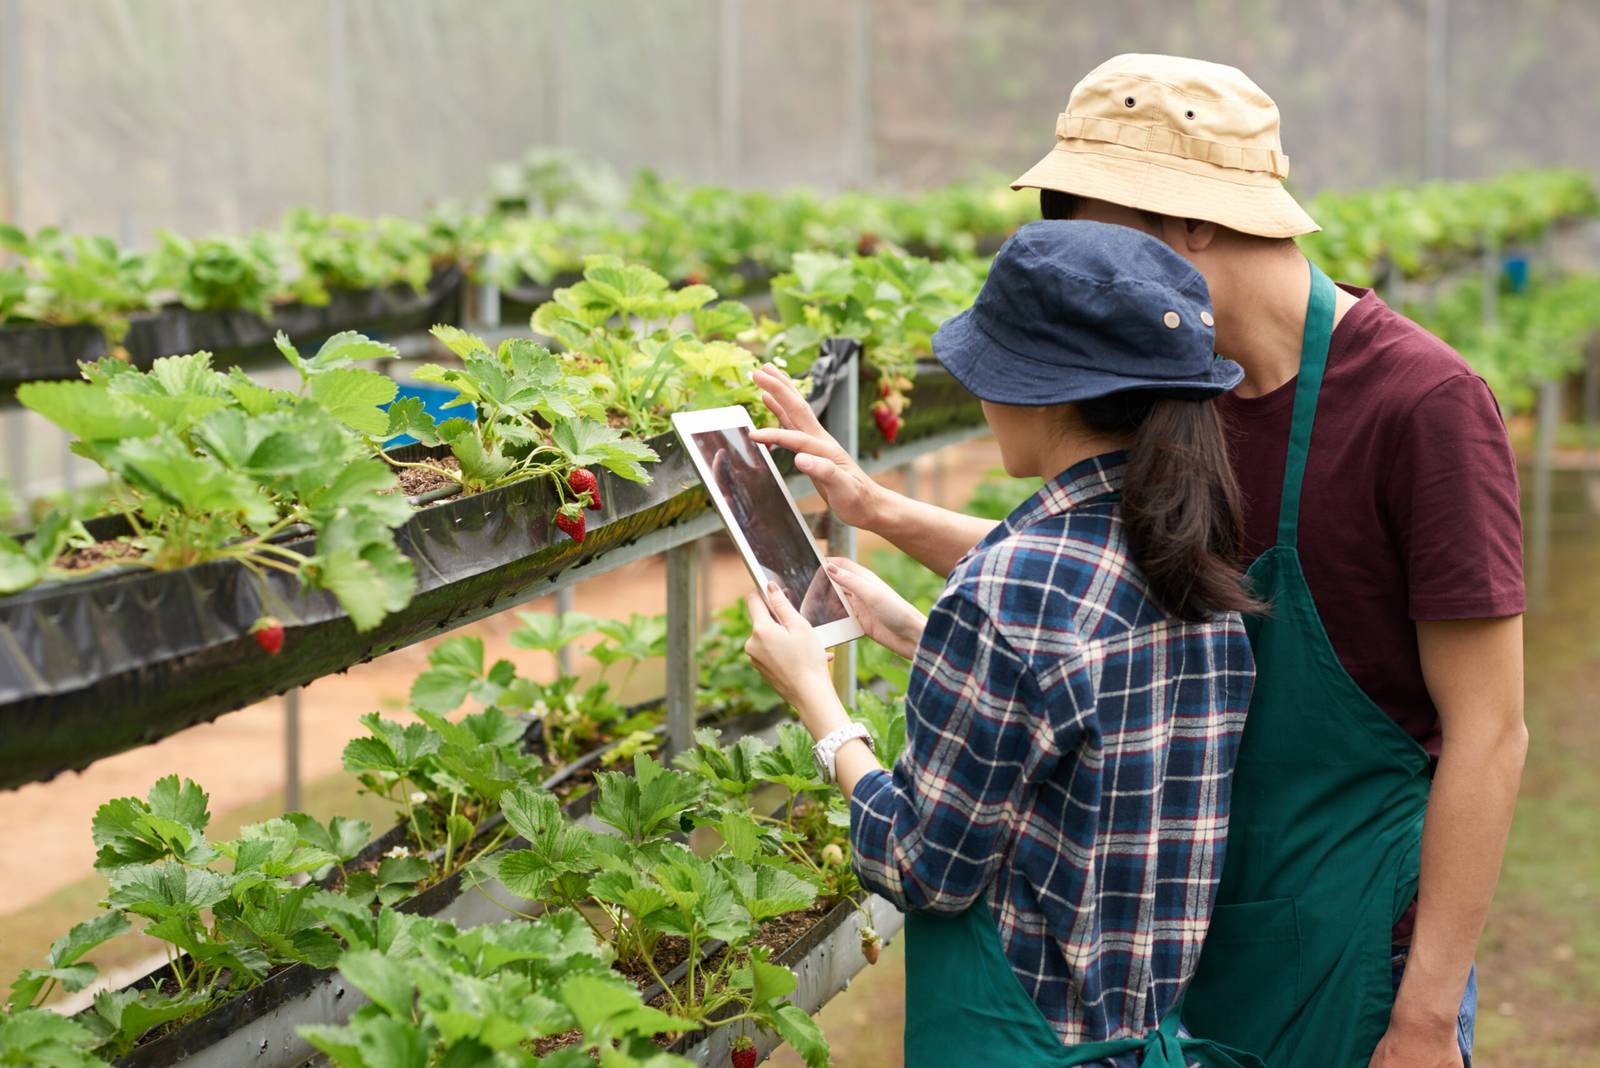 The Role of IoT in Smart Agriculture